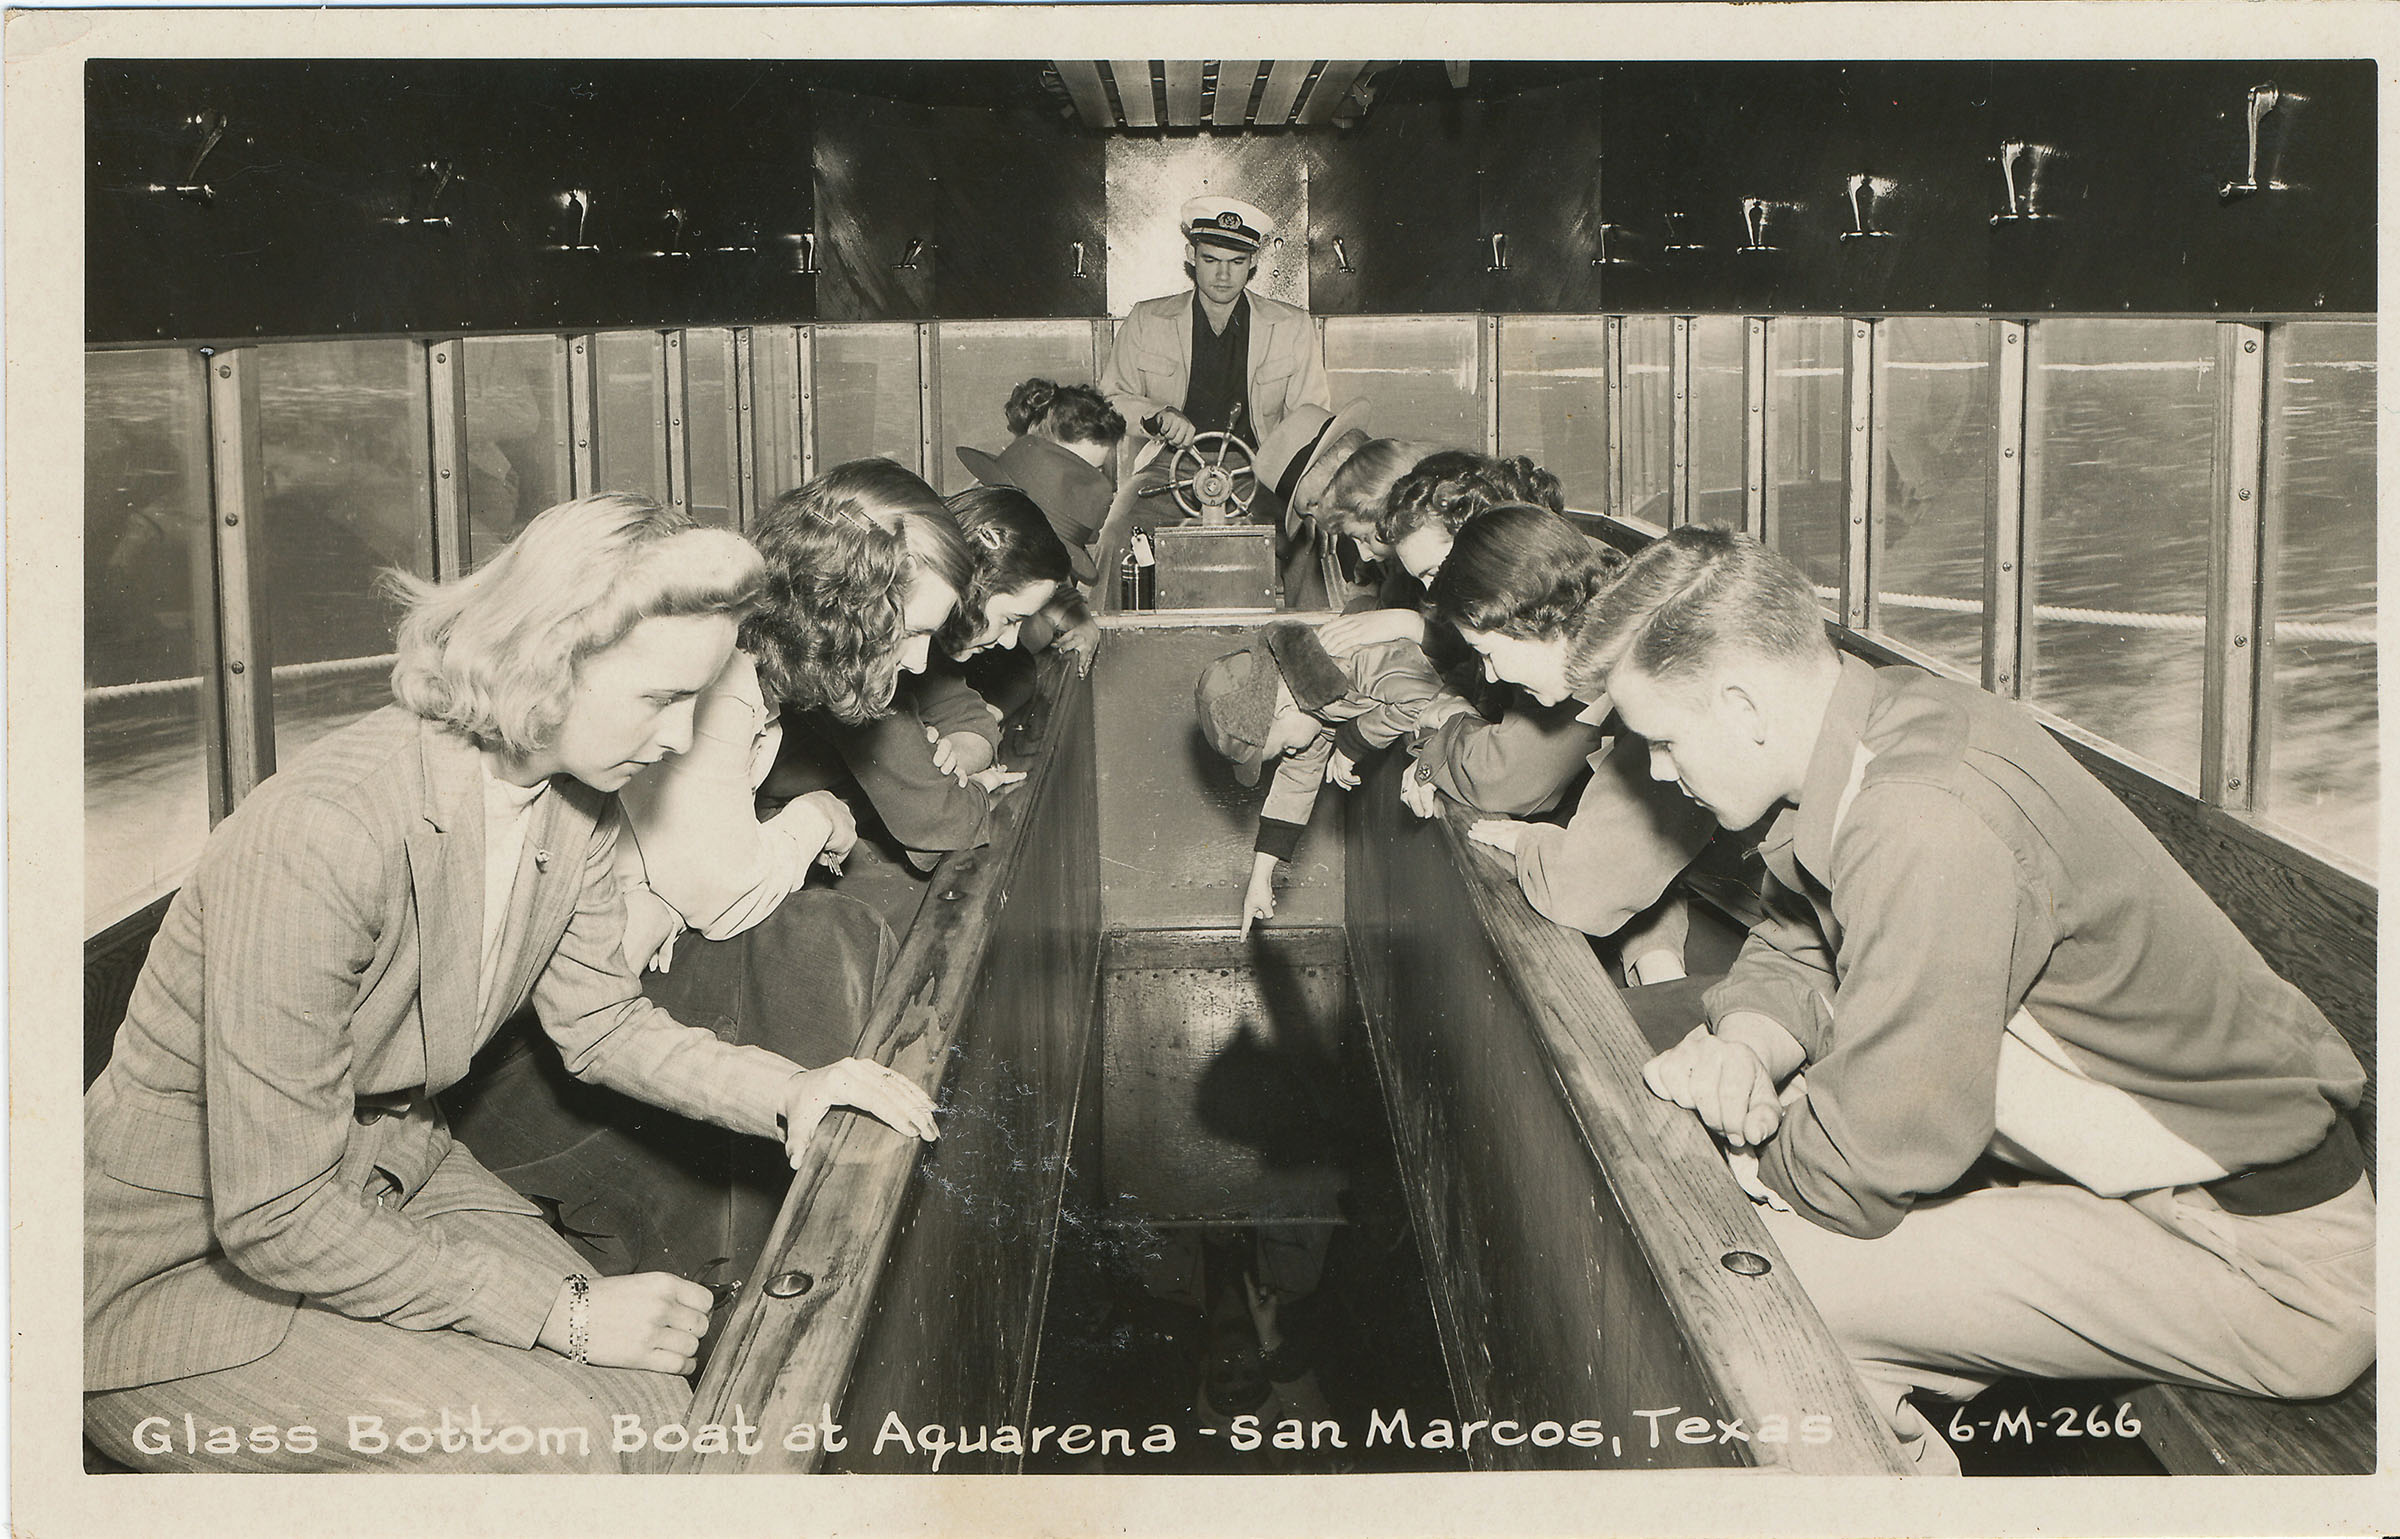 A group of people look through the bottom of a glass-bottomed boat in a vintage photograph